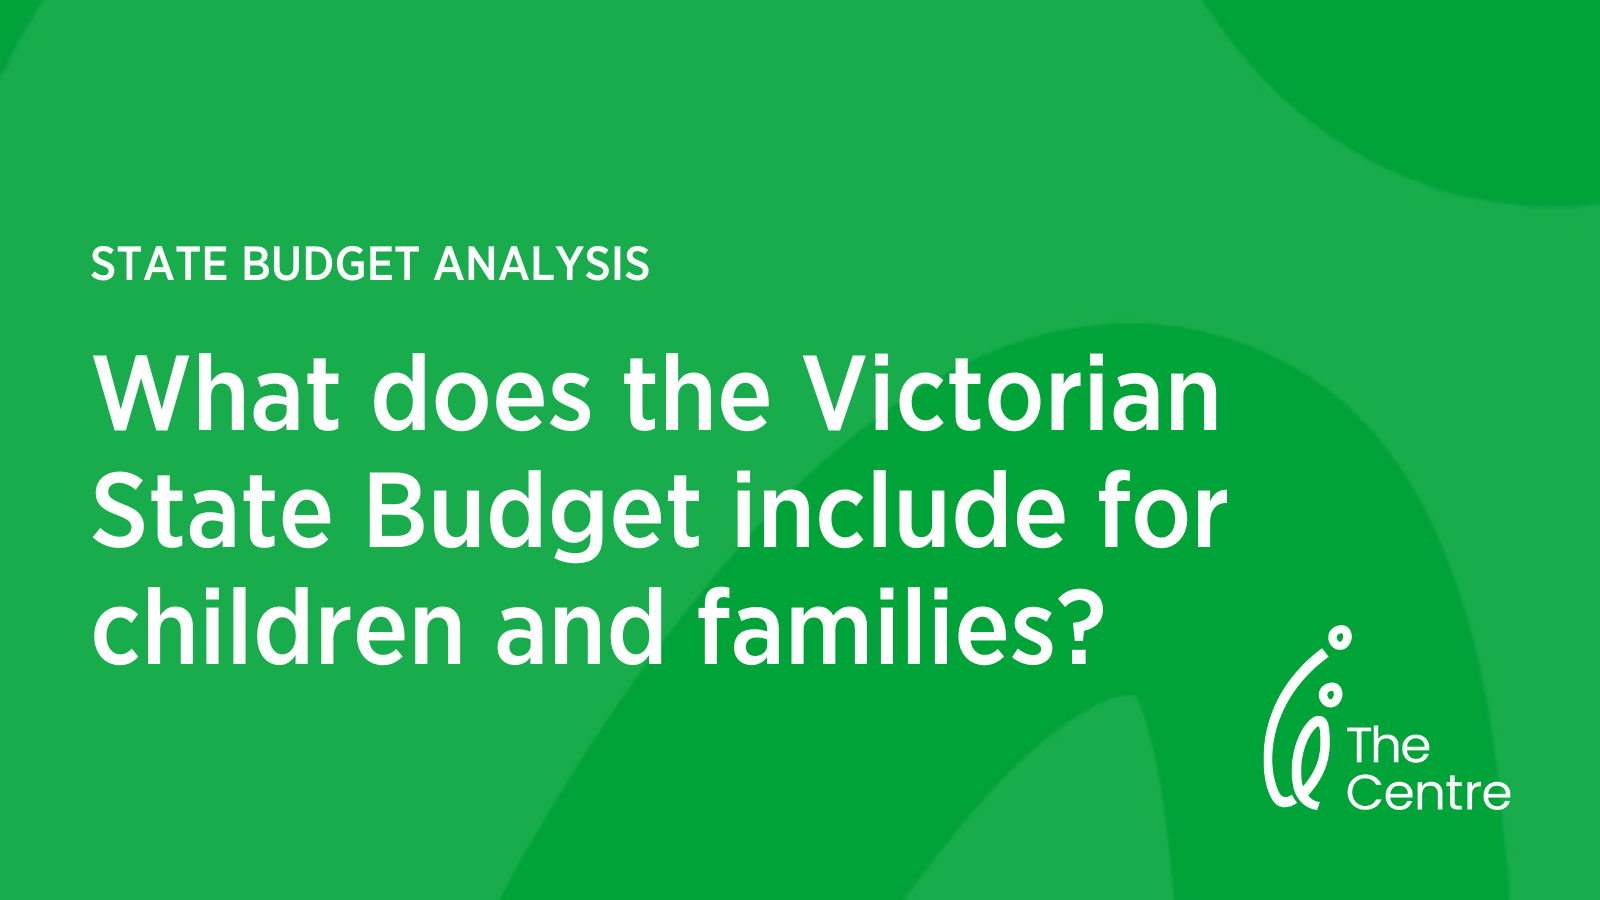 State Budget Analysis - What does the budget include for children and families?